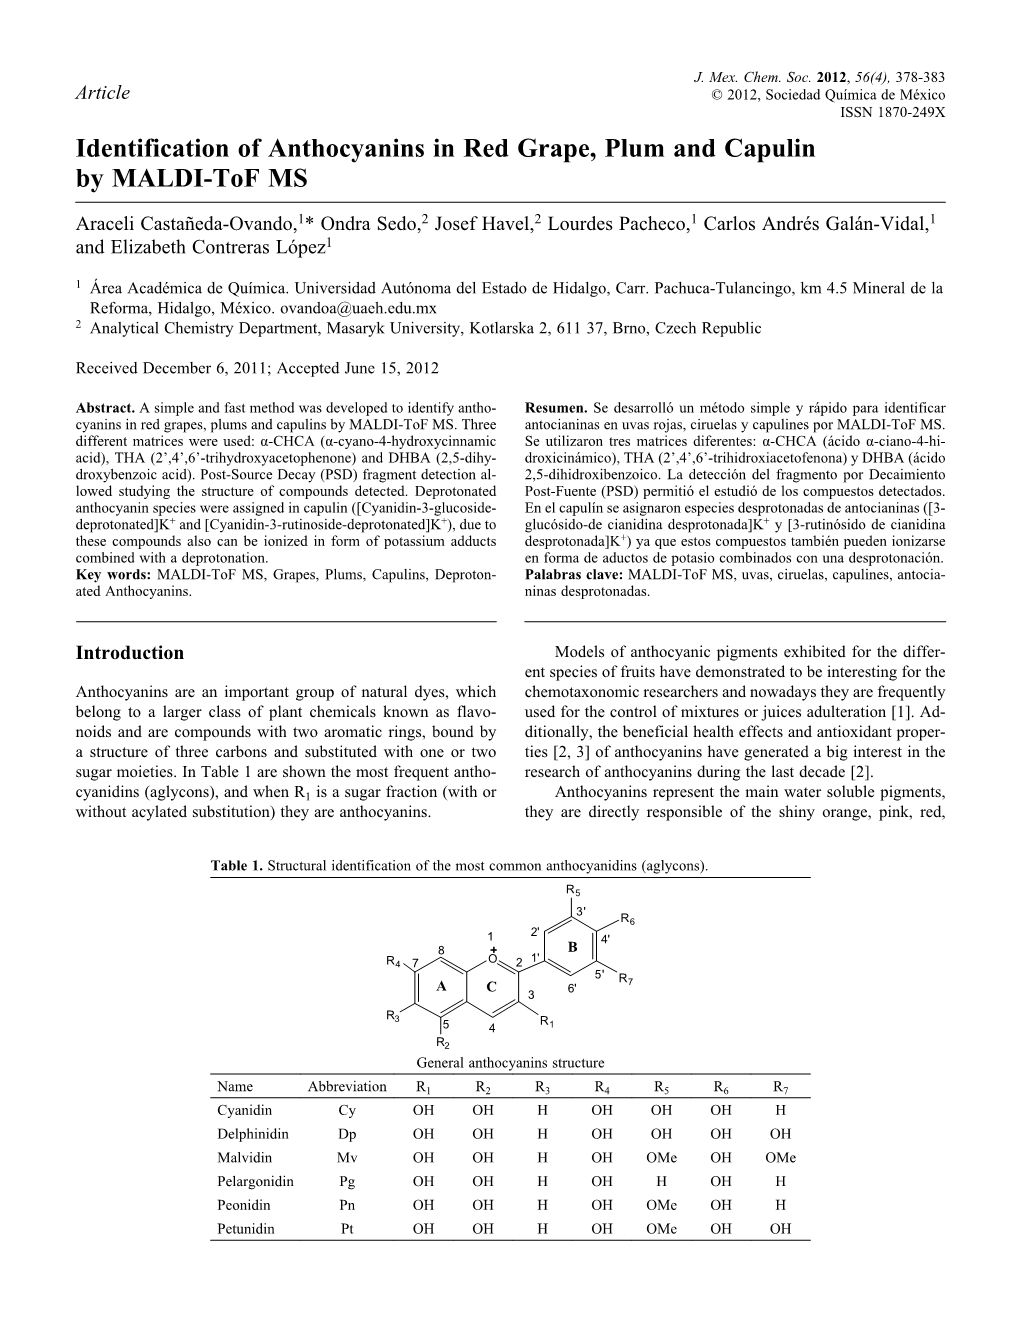 Identification of Anthocyanins in Red Grape, Plum and Capulin by MALDI-Tof MS